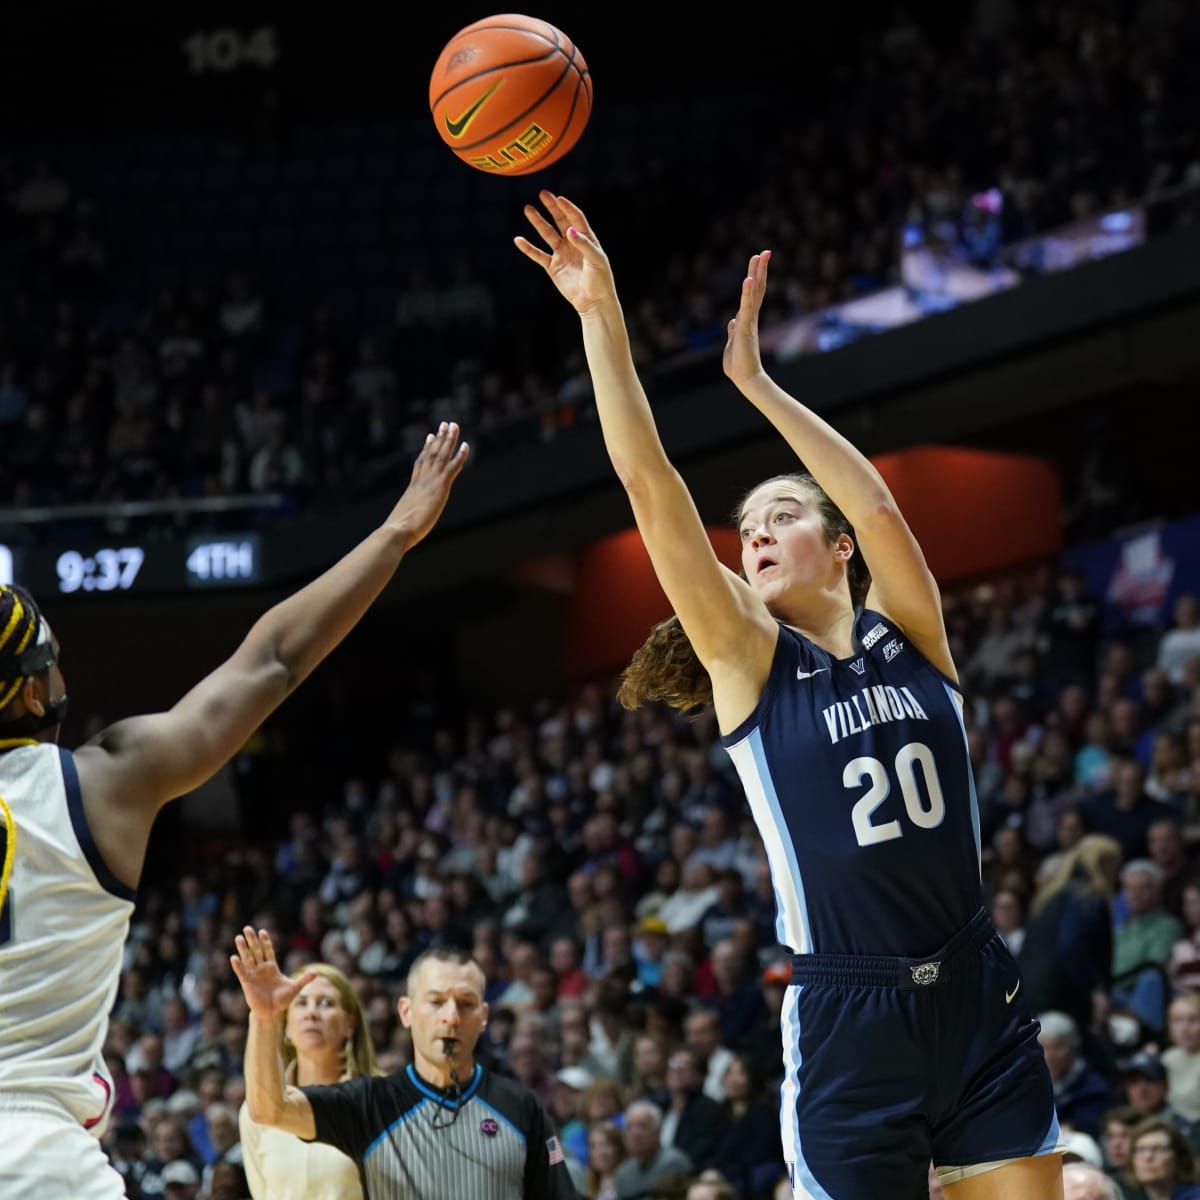 Watch Miami vs Villanova Stream womens college basketball live - How to Watch and Stream Major League and College Sports